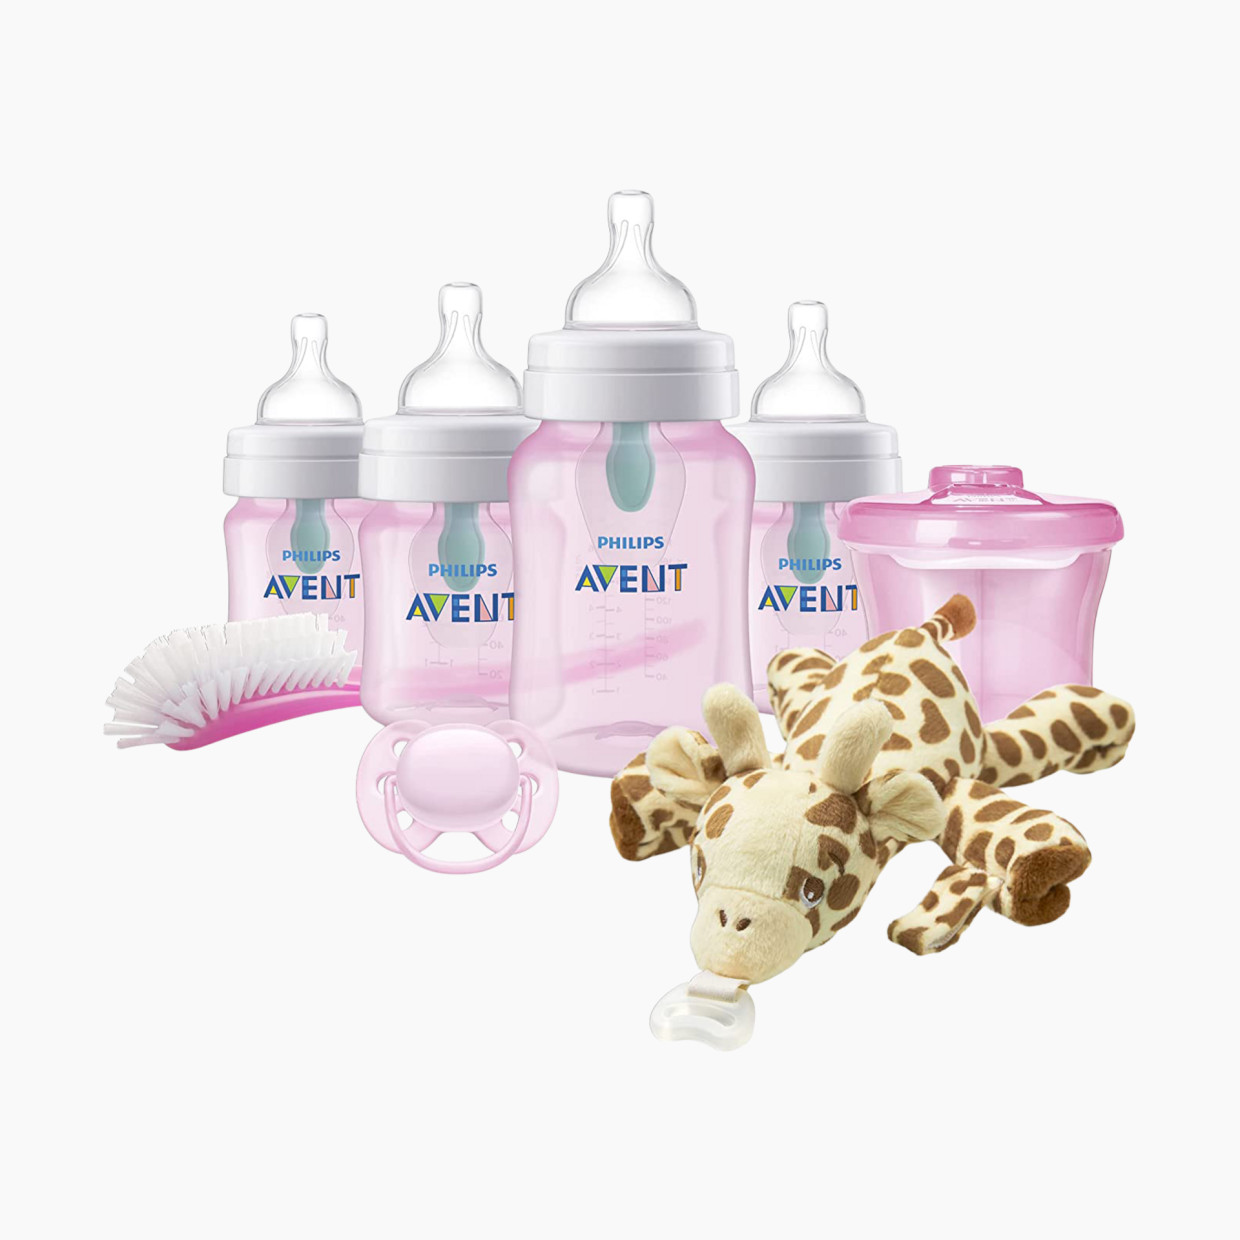 Philips Avent Anti-colic Baby Bottle With AirFree Vent Newborn Gift Set - Pink.